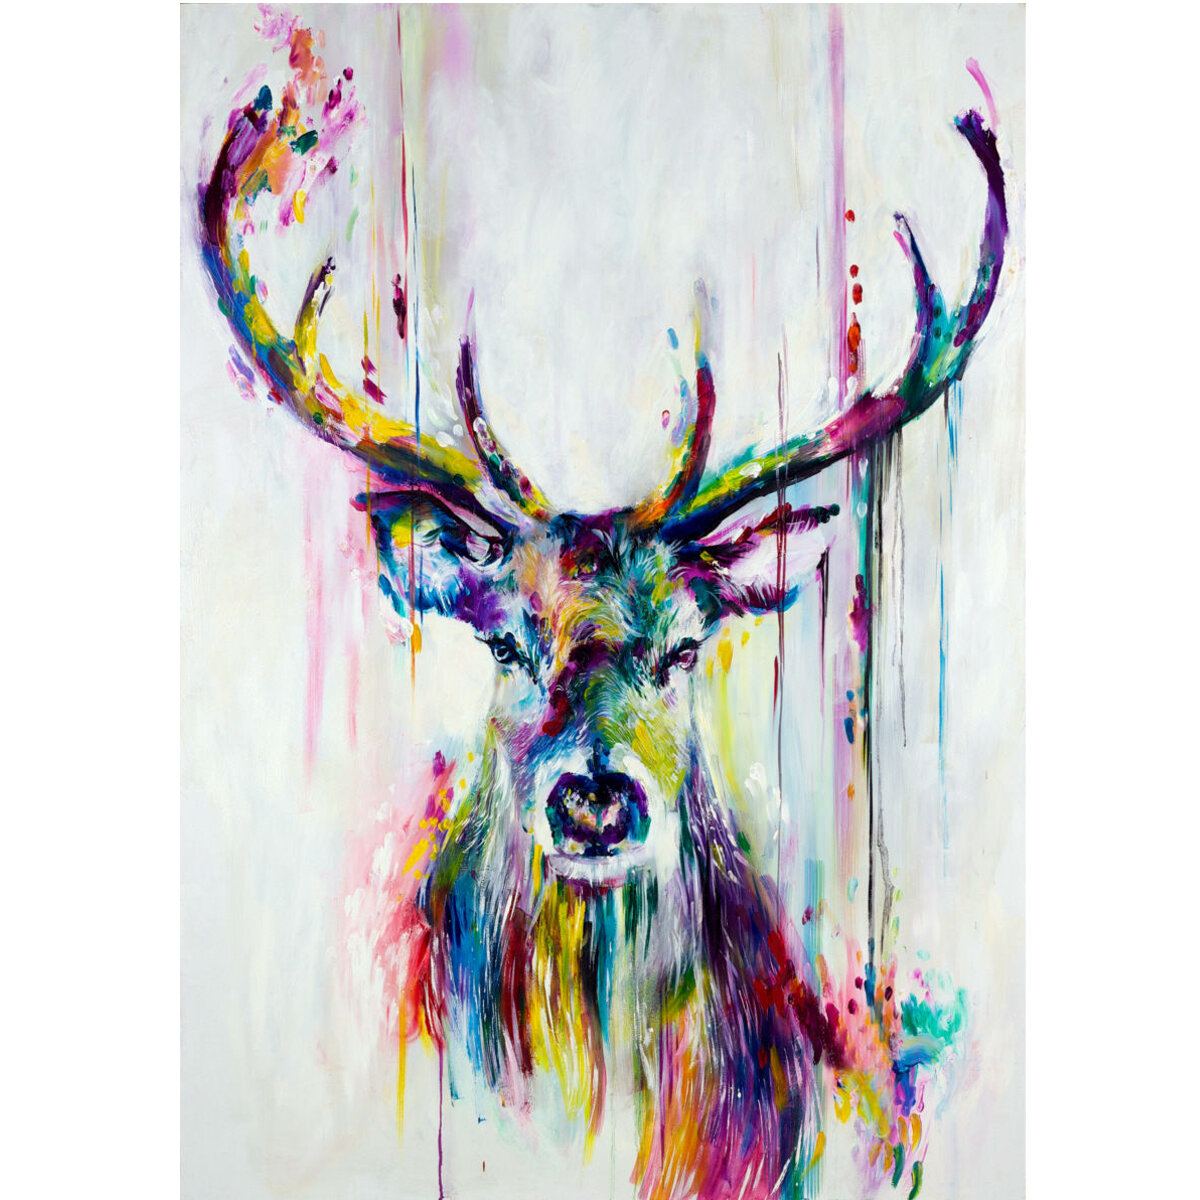 

Watercolour Deer Head Minimalist Canvas Painting Poster Wall Art Home Office Decor